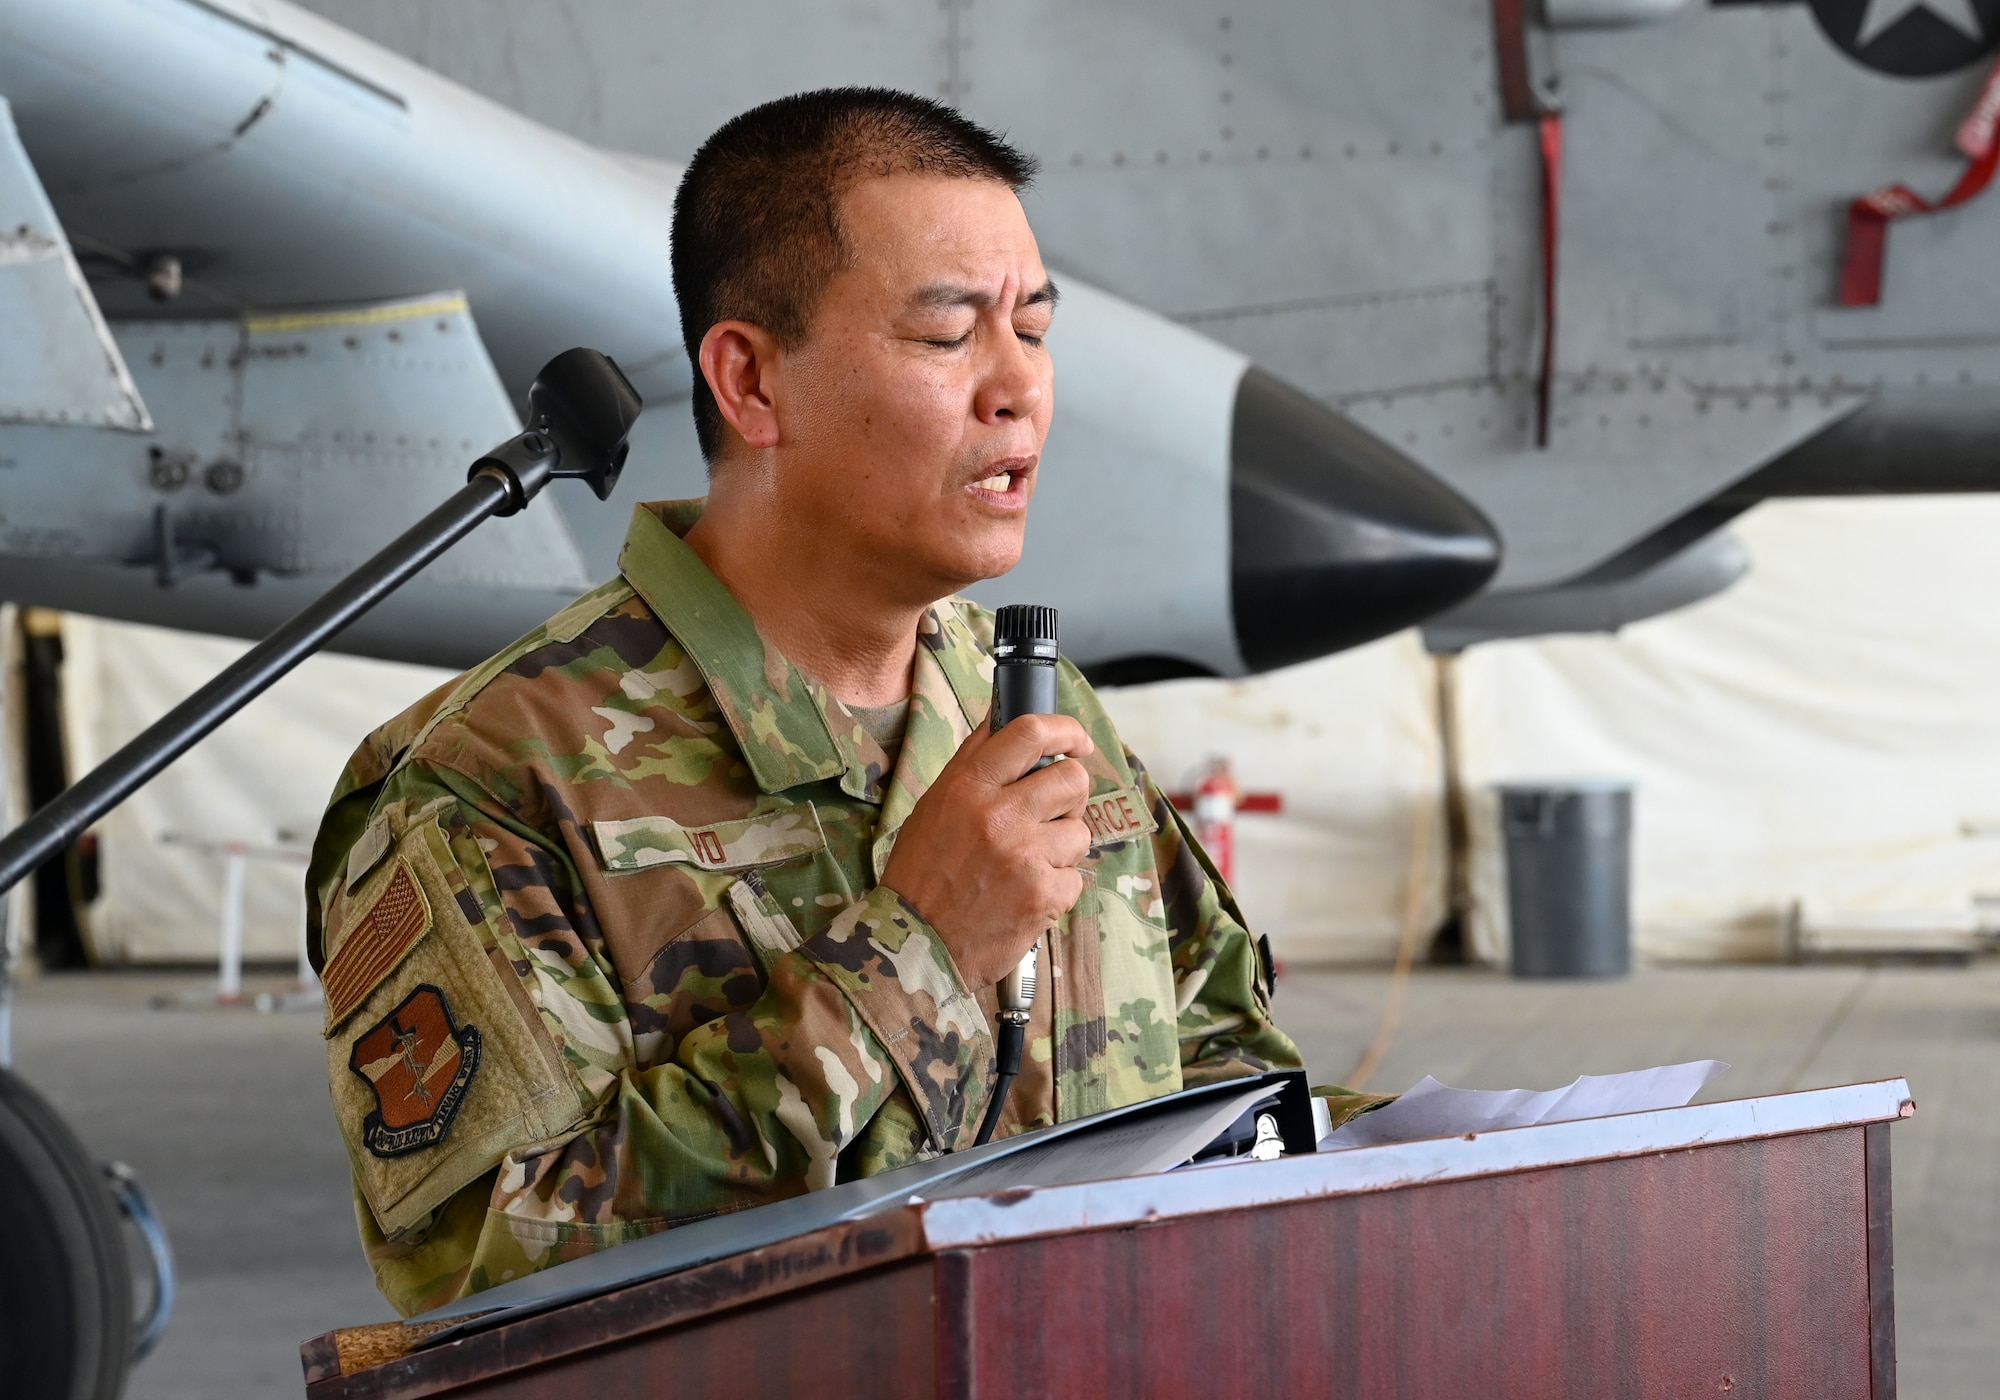 A photo of an Airman providing the invocation at a podium.